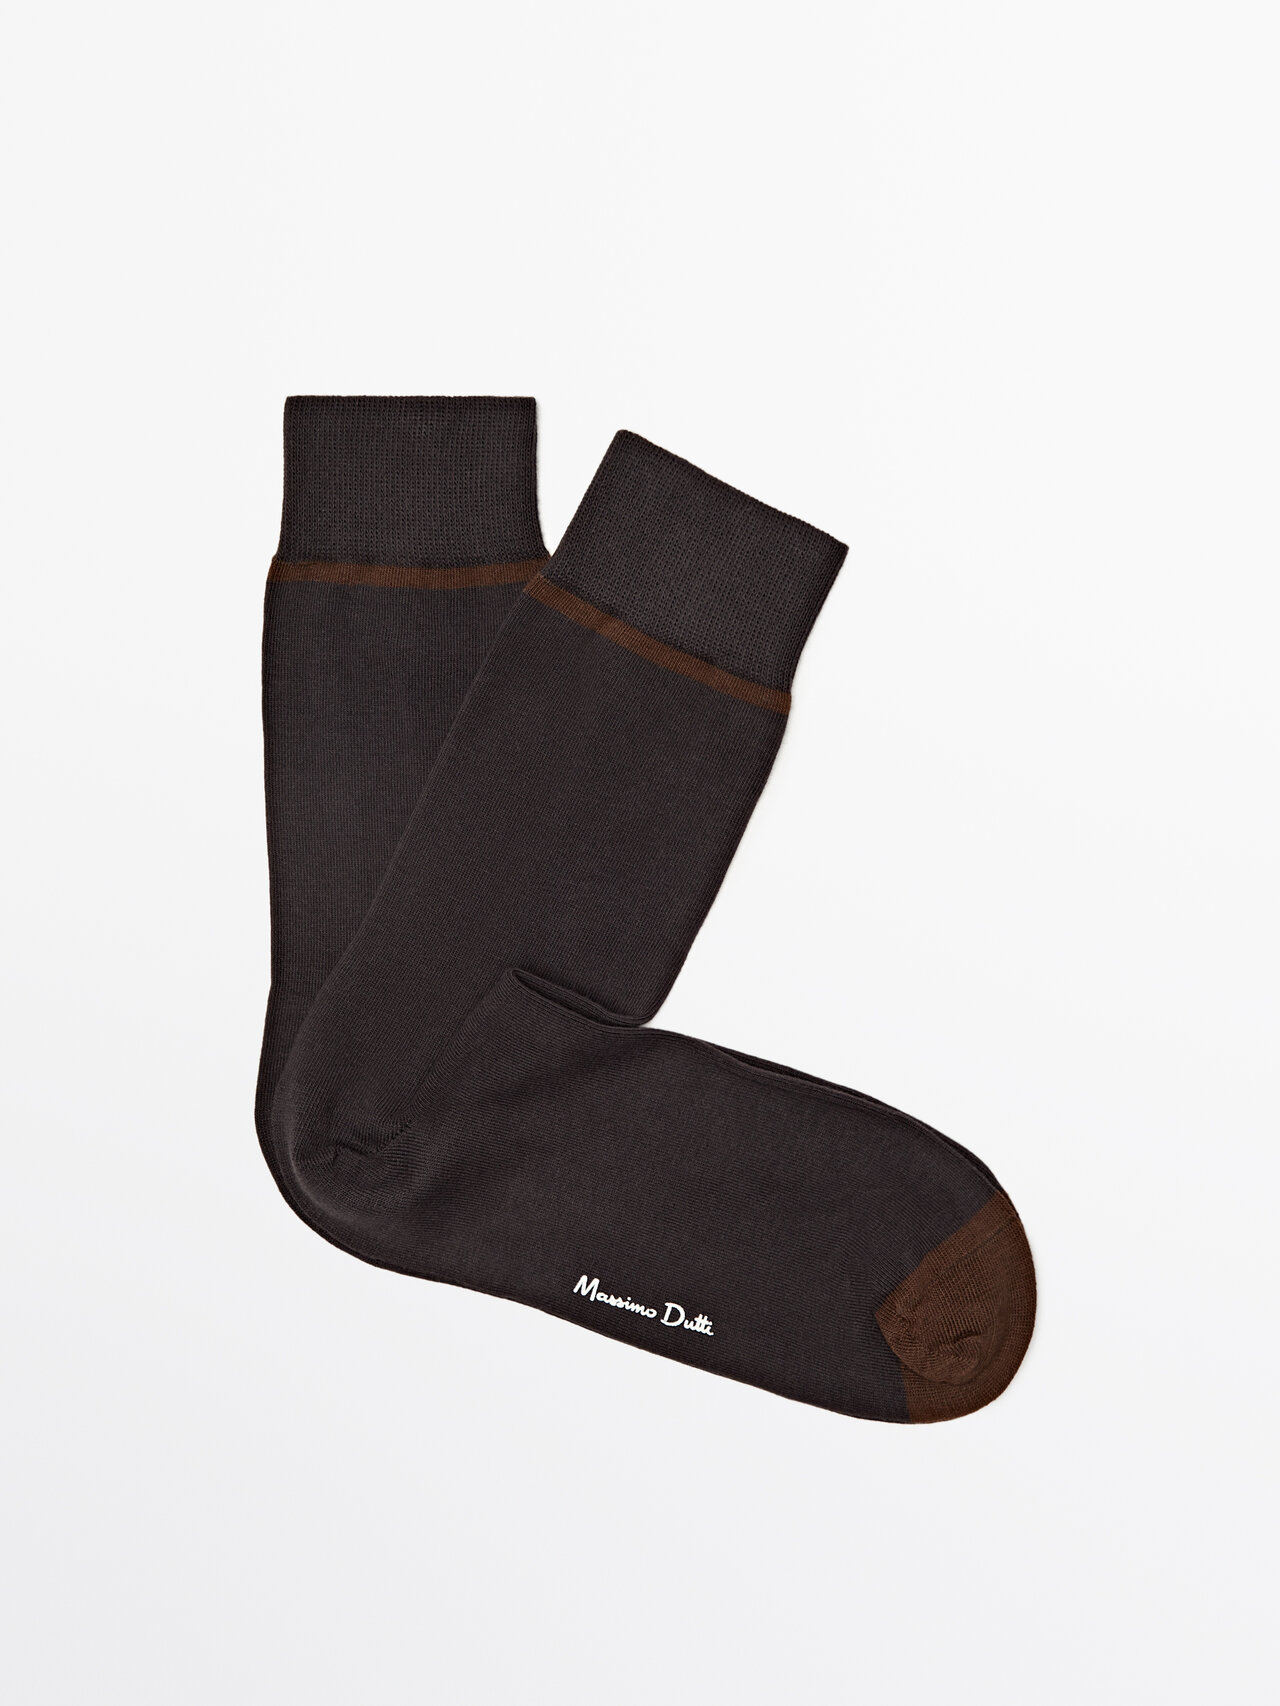 Massimo Dutti Long Socks With Contrast Horizontal Stripe In Brown